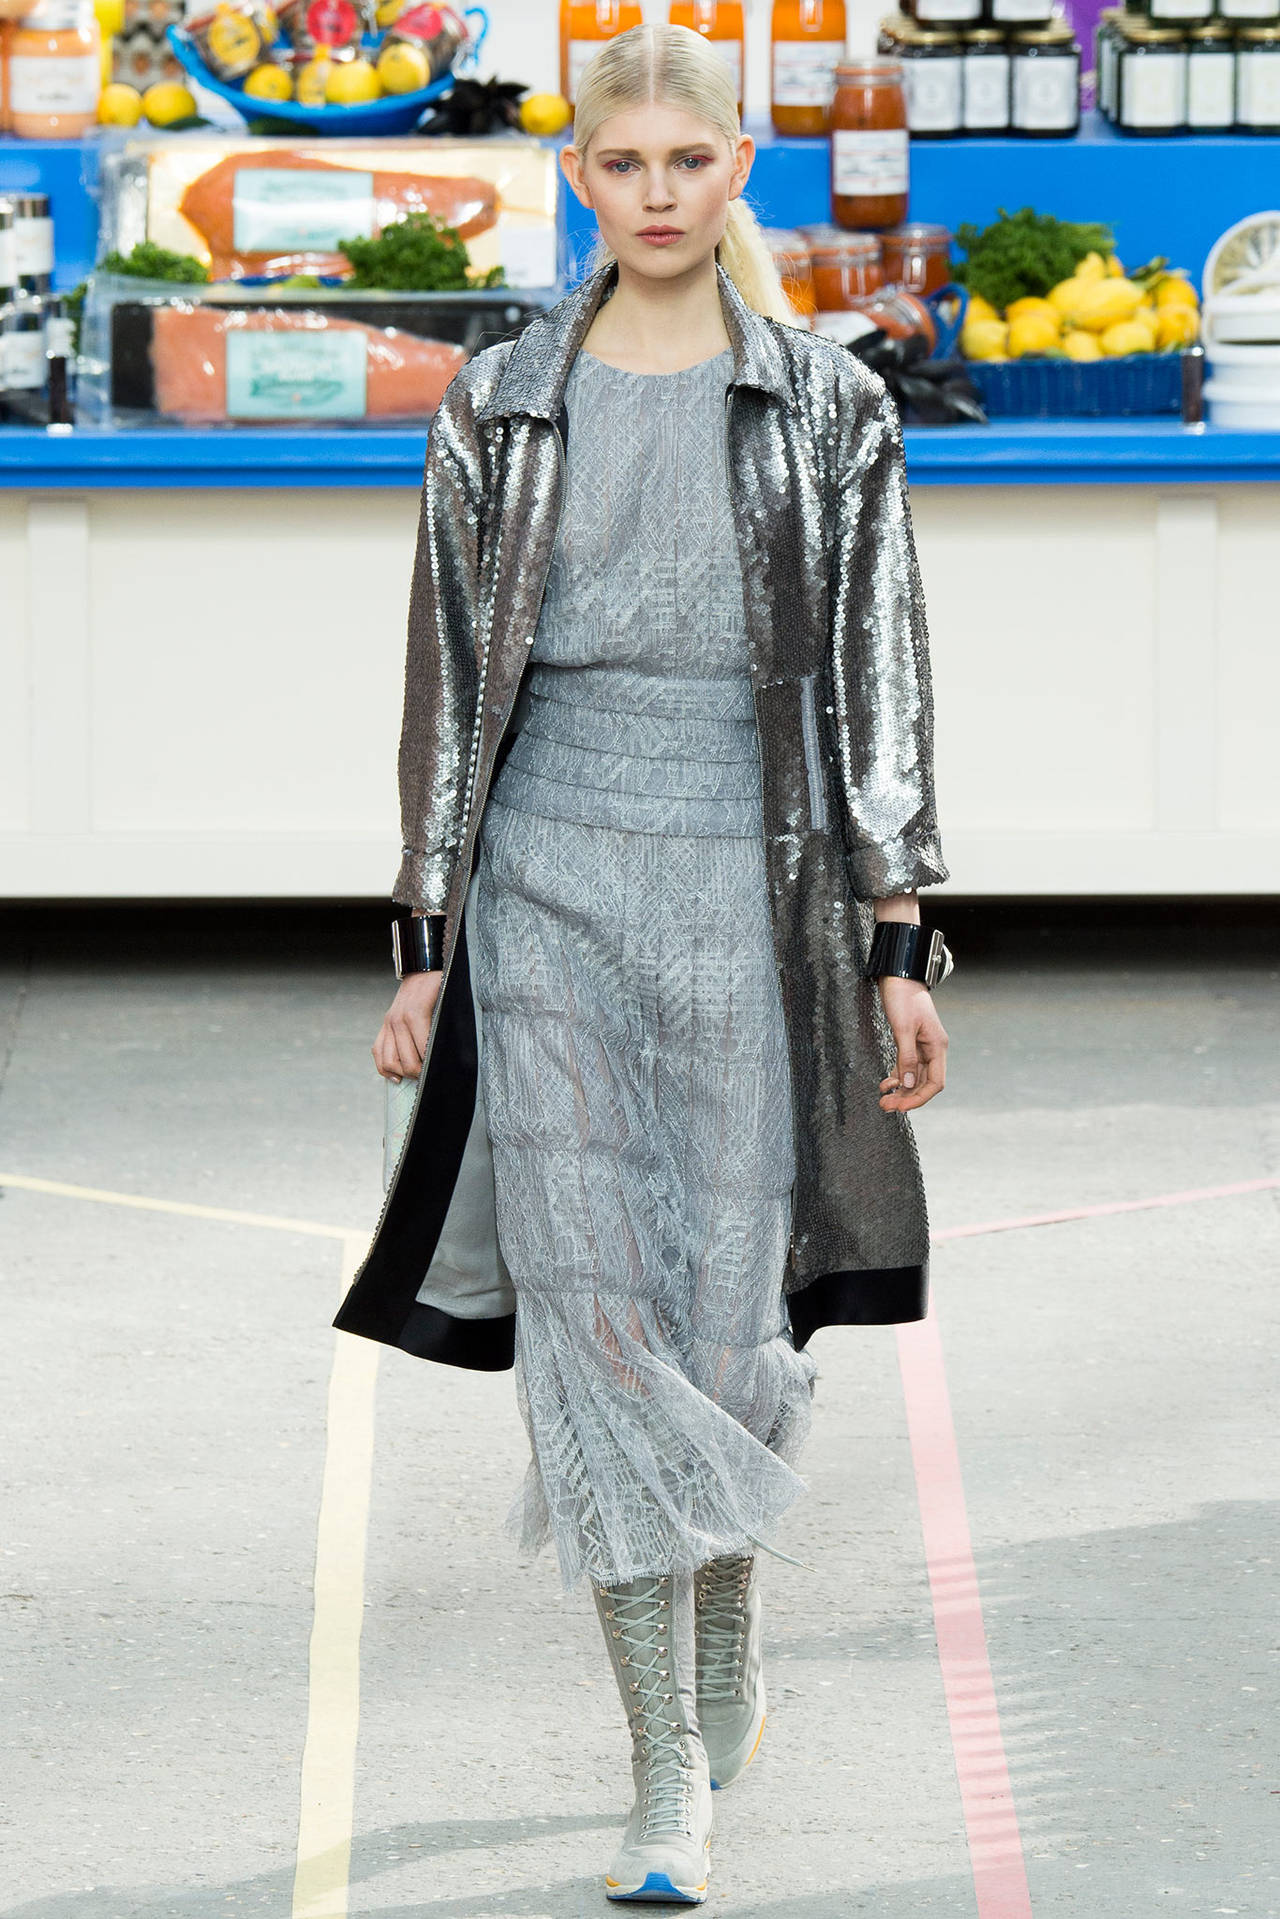 Chanel 2014 Fall runway silver sequin dress / coat. Excellent condition - worn once if at all. Original retail was $16 K+. Tagged size FR 38 (USA 6). Can be worn fully zipped down as a jacket, or zippered up as a dress. Pointed collars, corset look